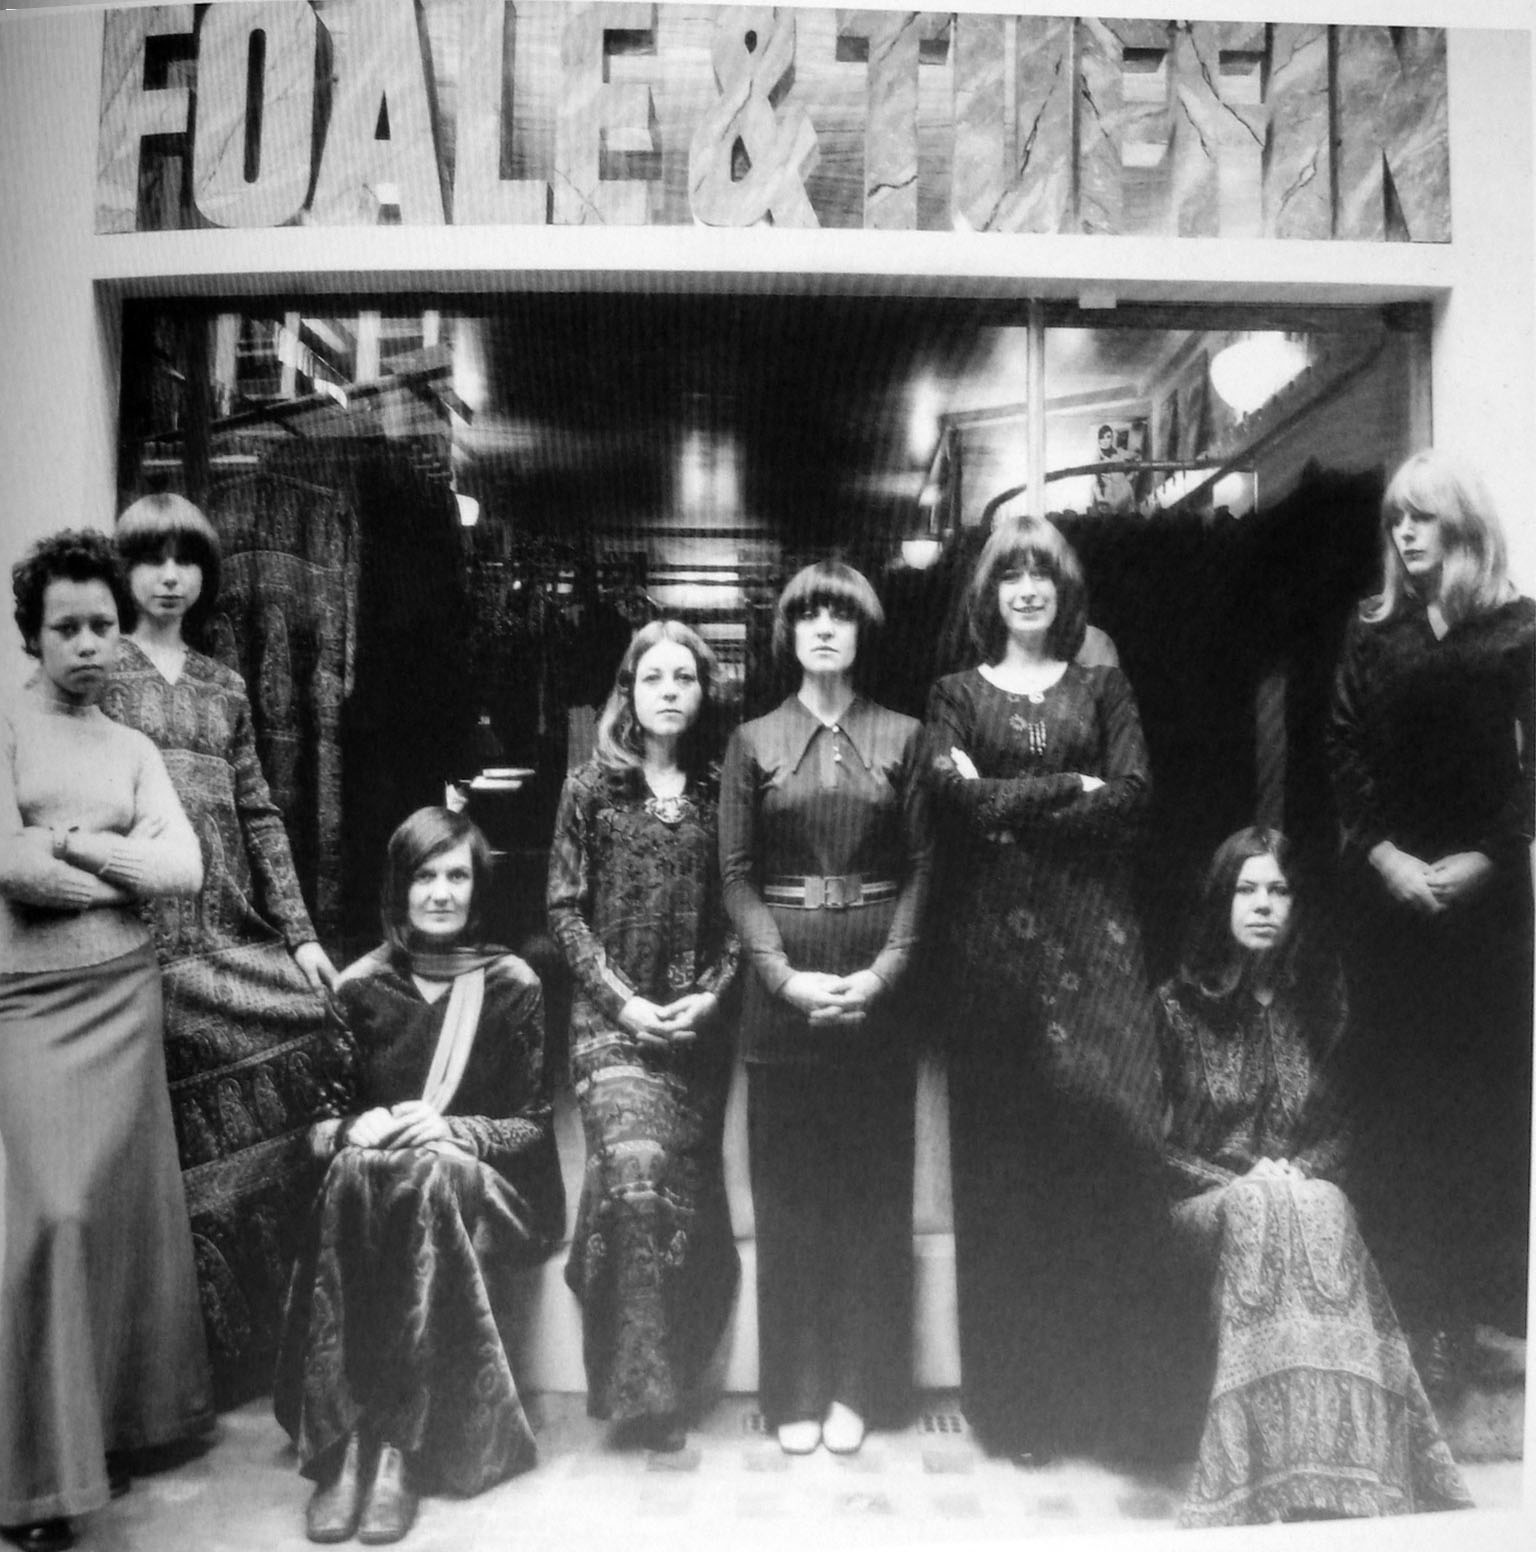 Foale and Tuffin London store front